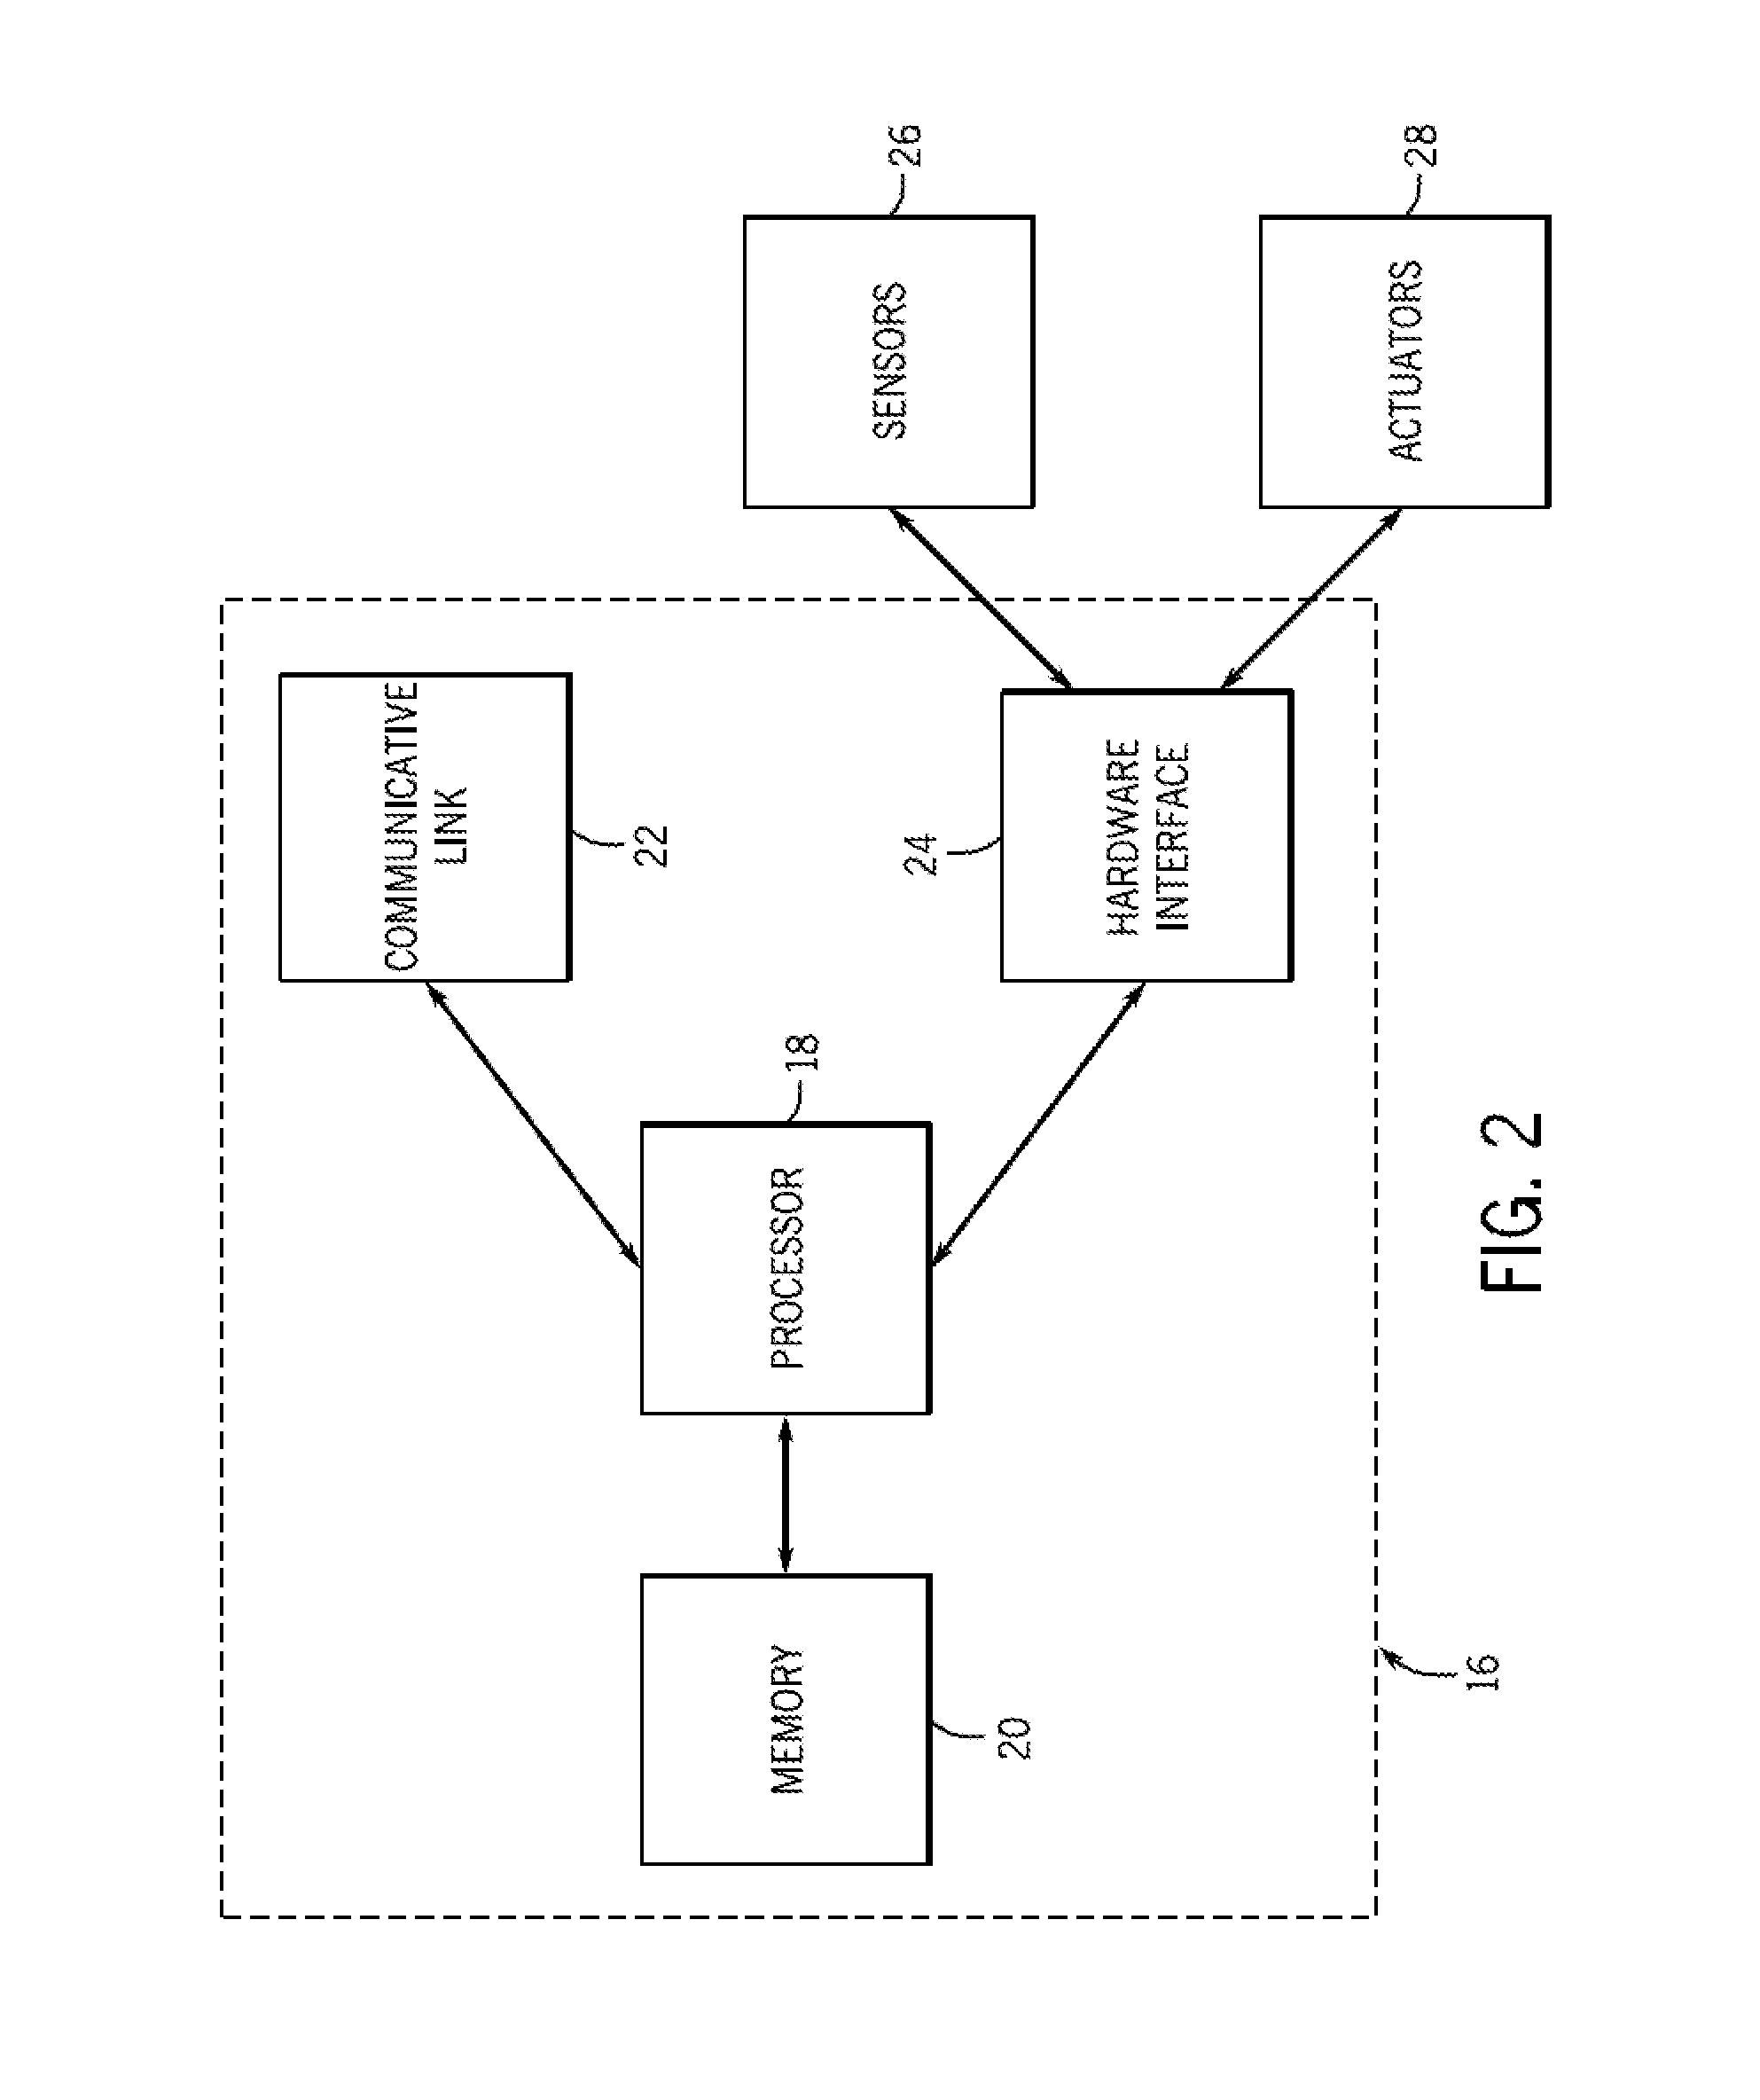 Systems and Methods for Controlling Air-to-Fuel Ratio Based on Catalytic Converter Performance